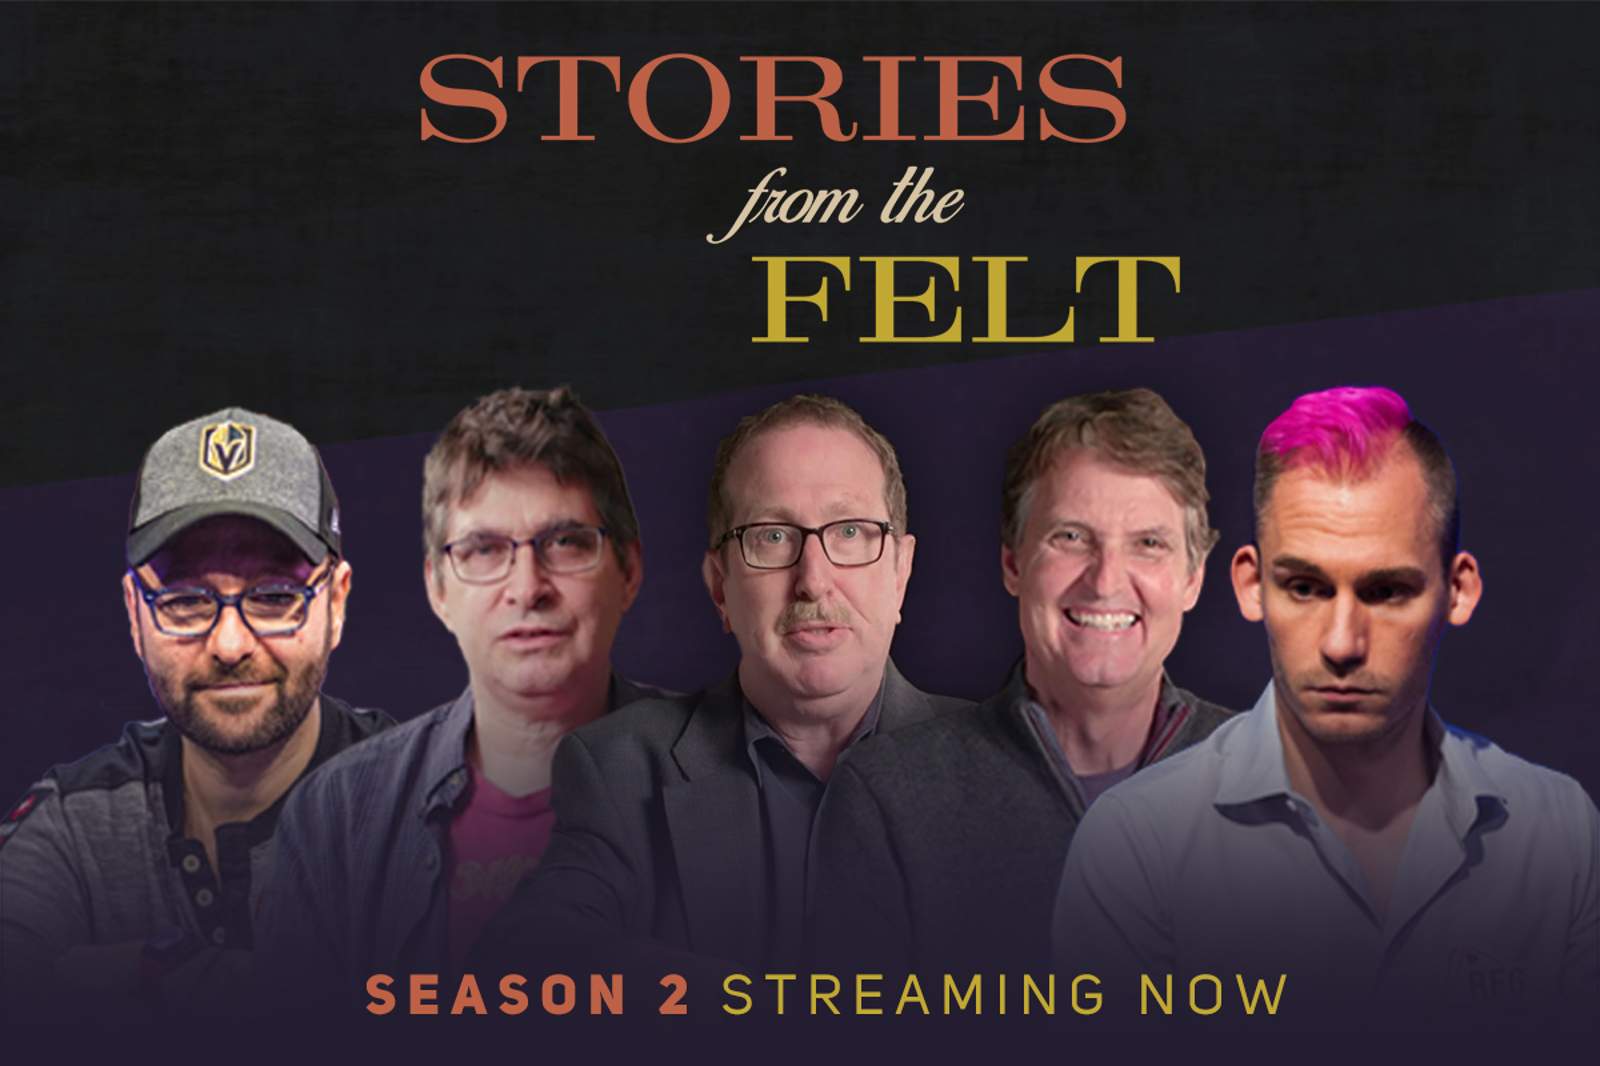 The Greatest Untold Stories Come Alive with Stories From the Felt Season 2